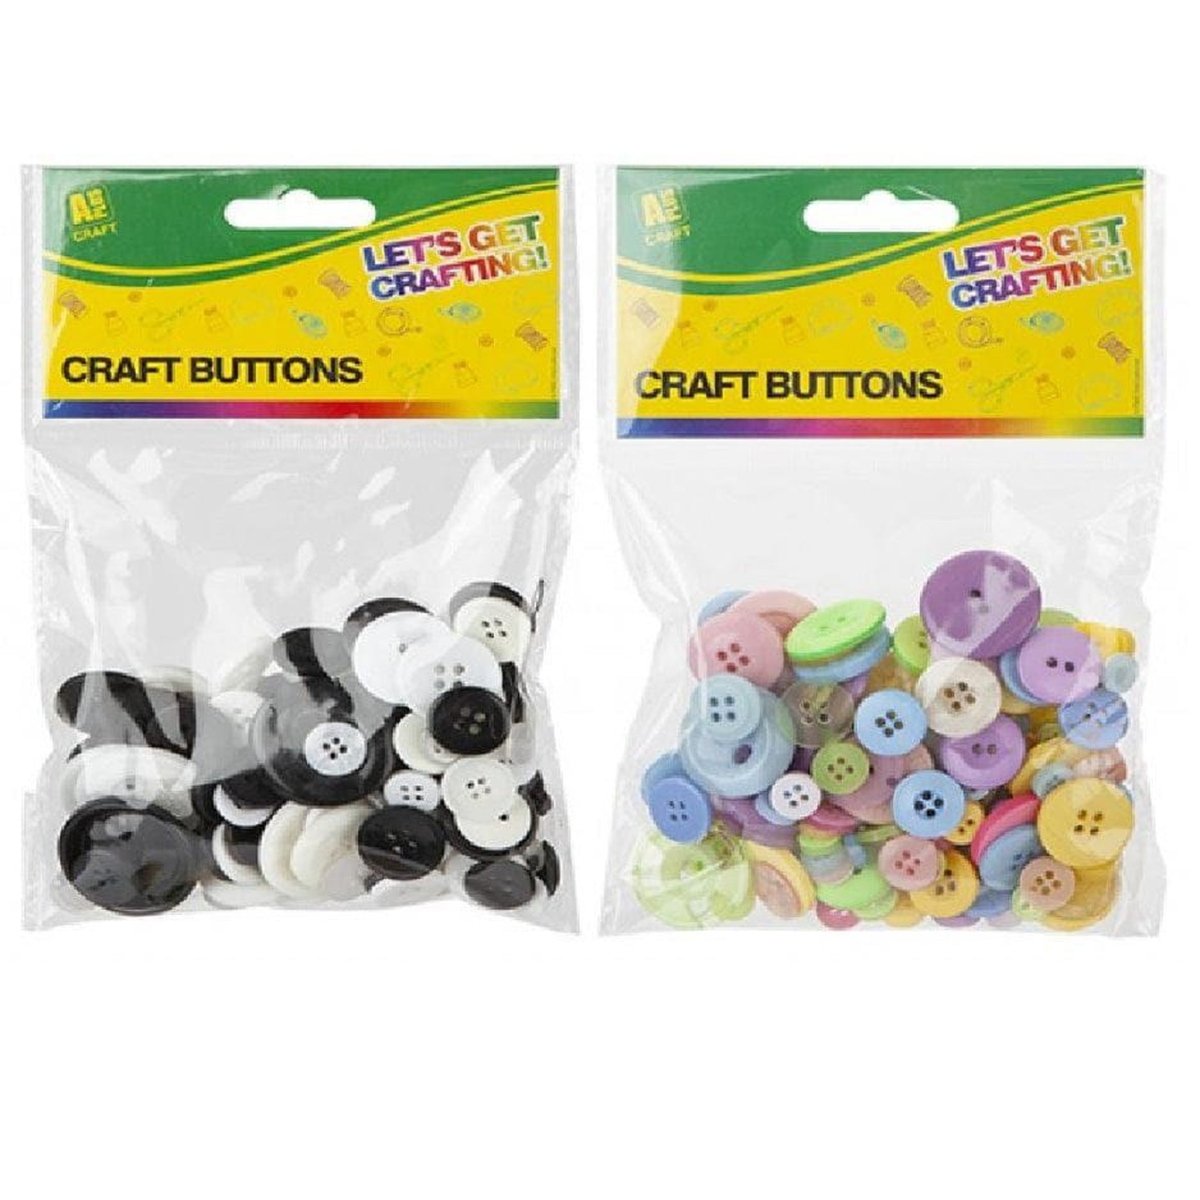 Assorted Craft Buttons - Kids Party Craft